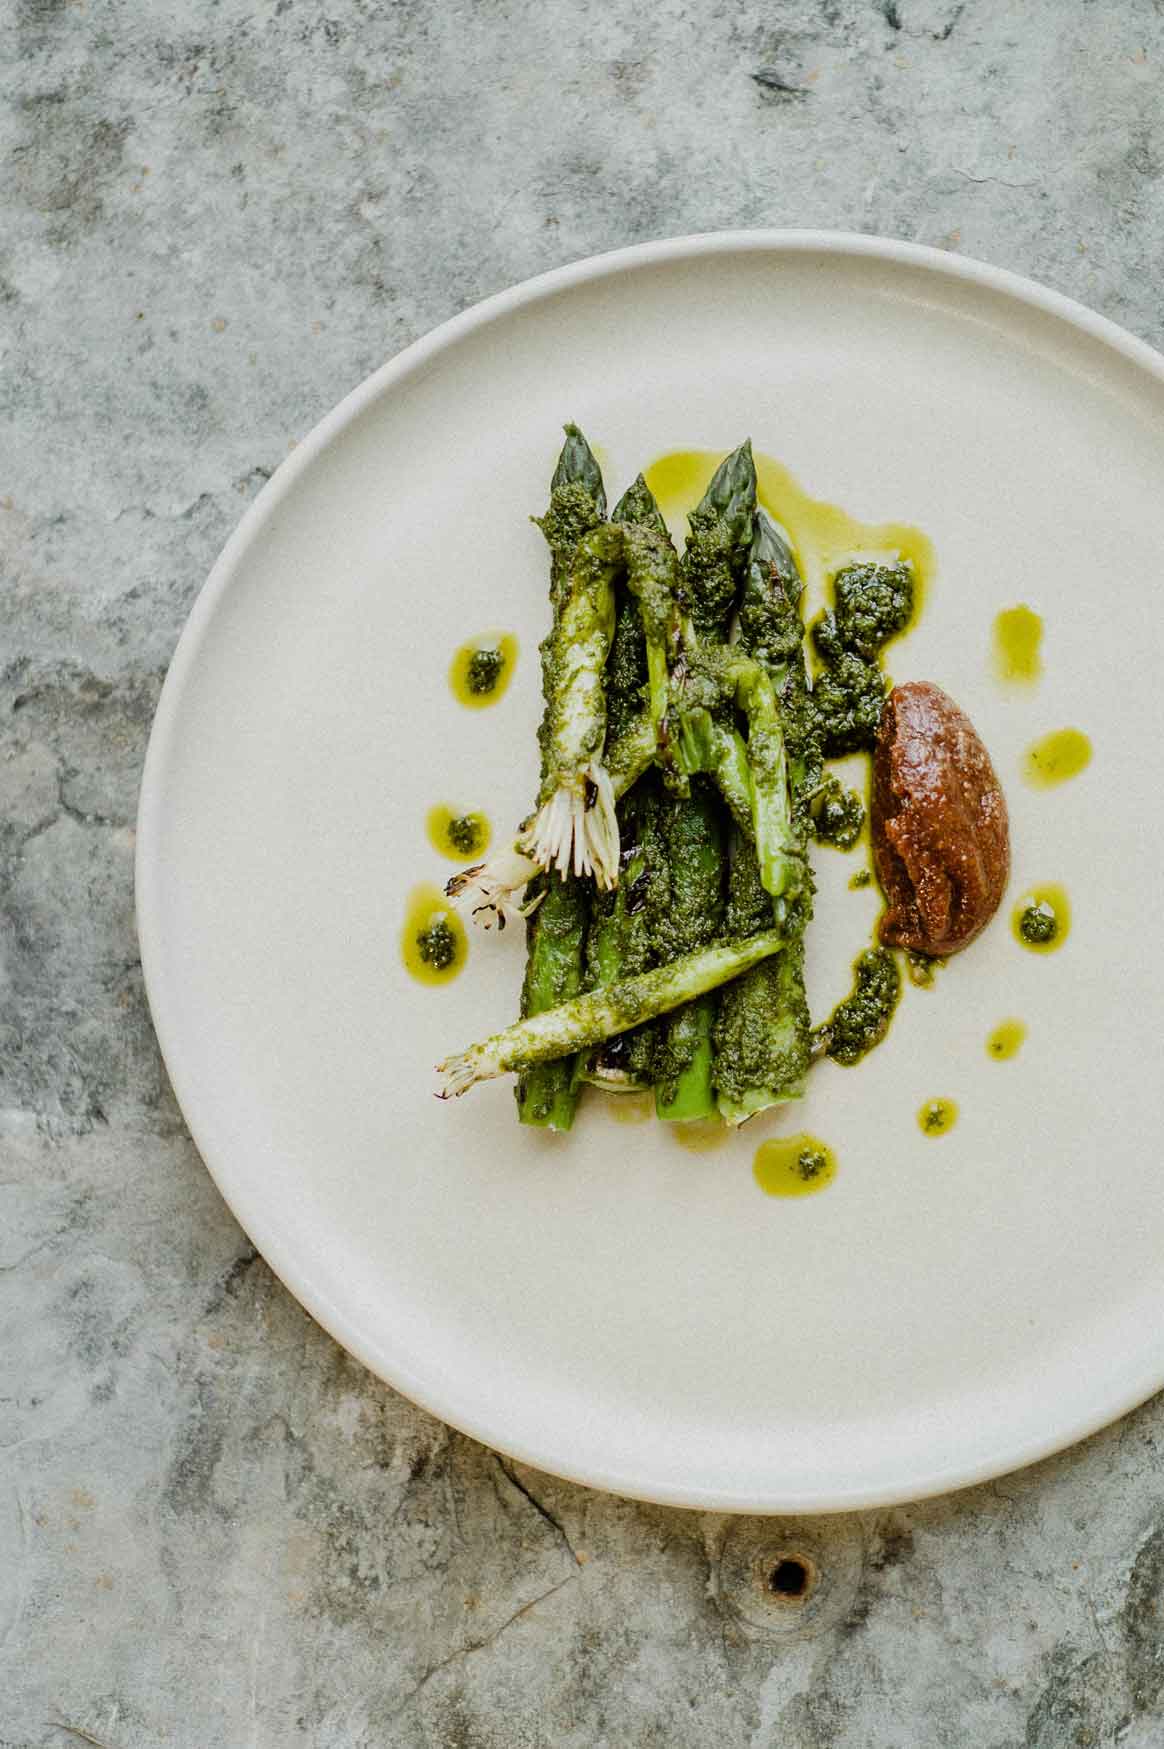 Asparagus served with pesto at Temple